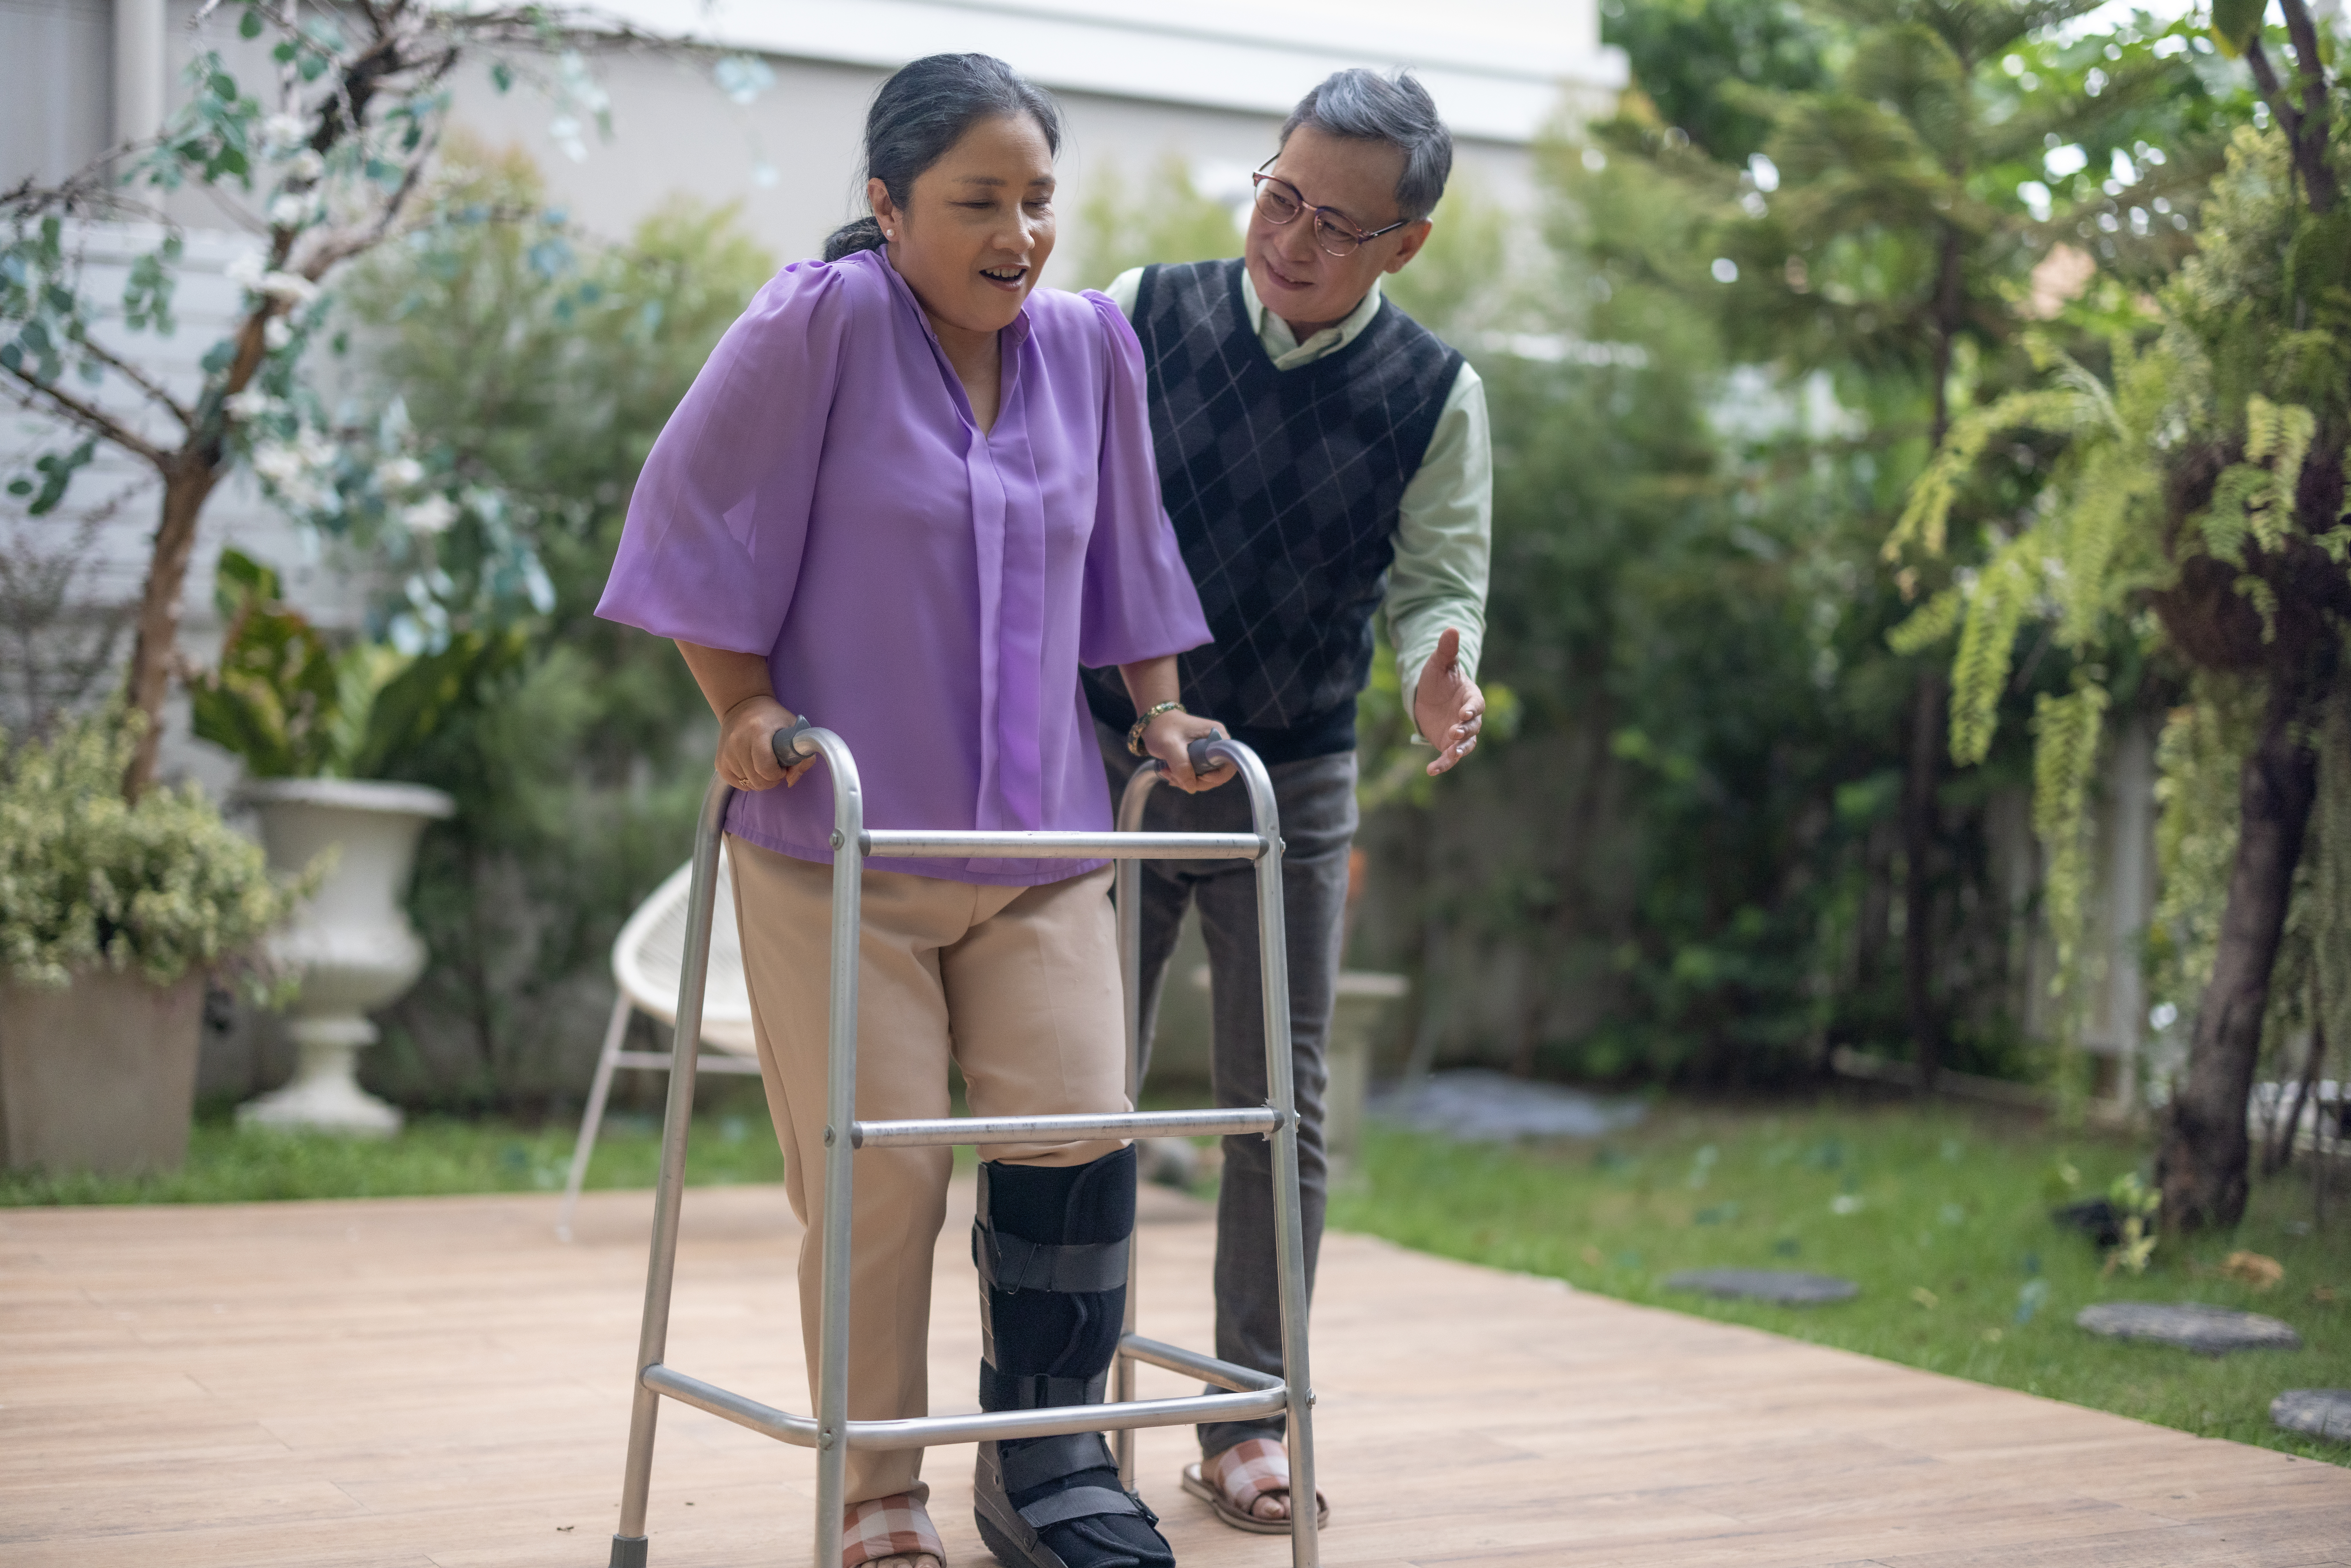 A smiling person assists someone who is using a walking frame